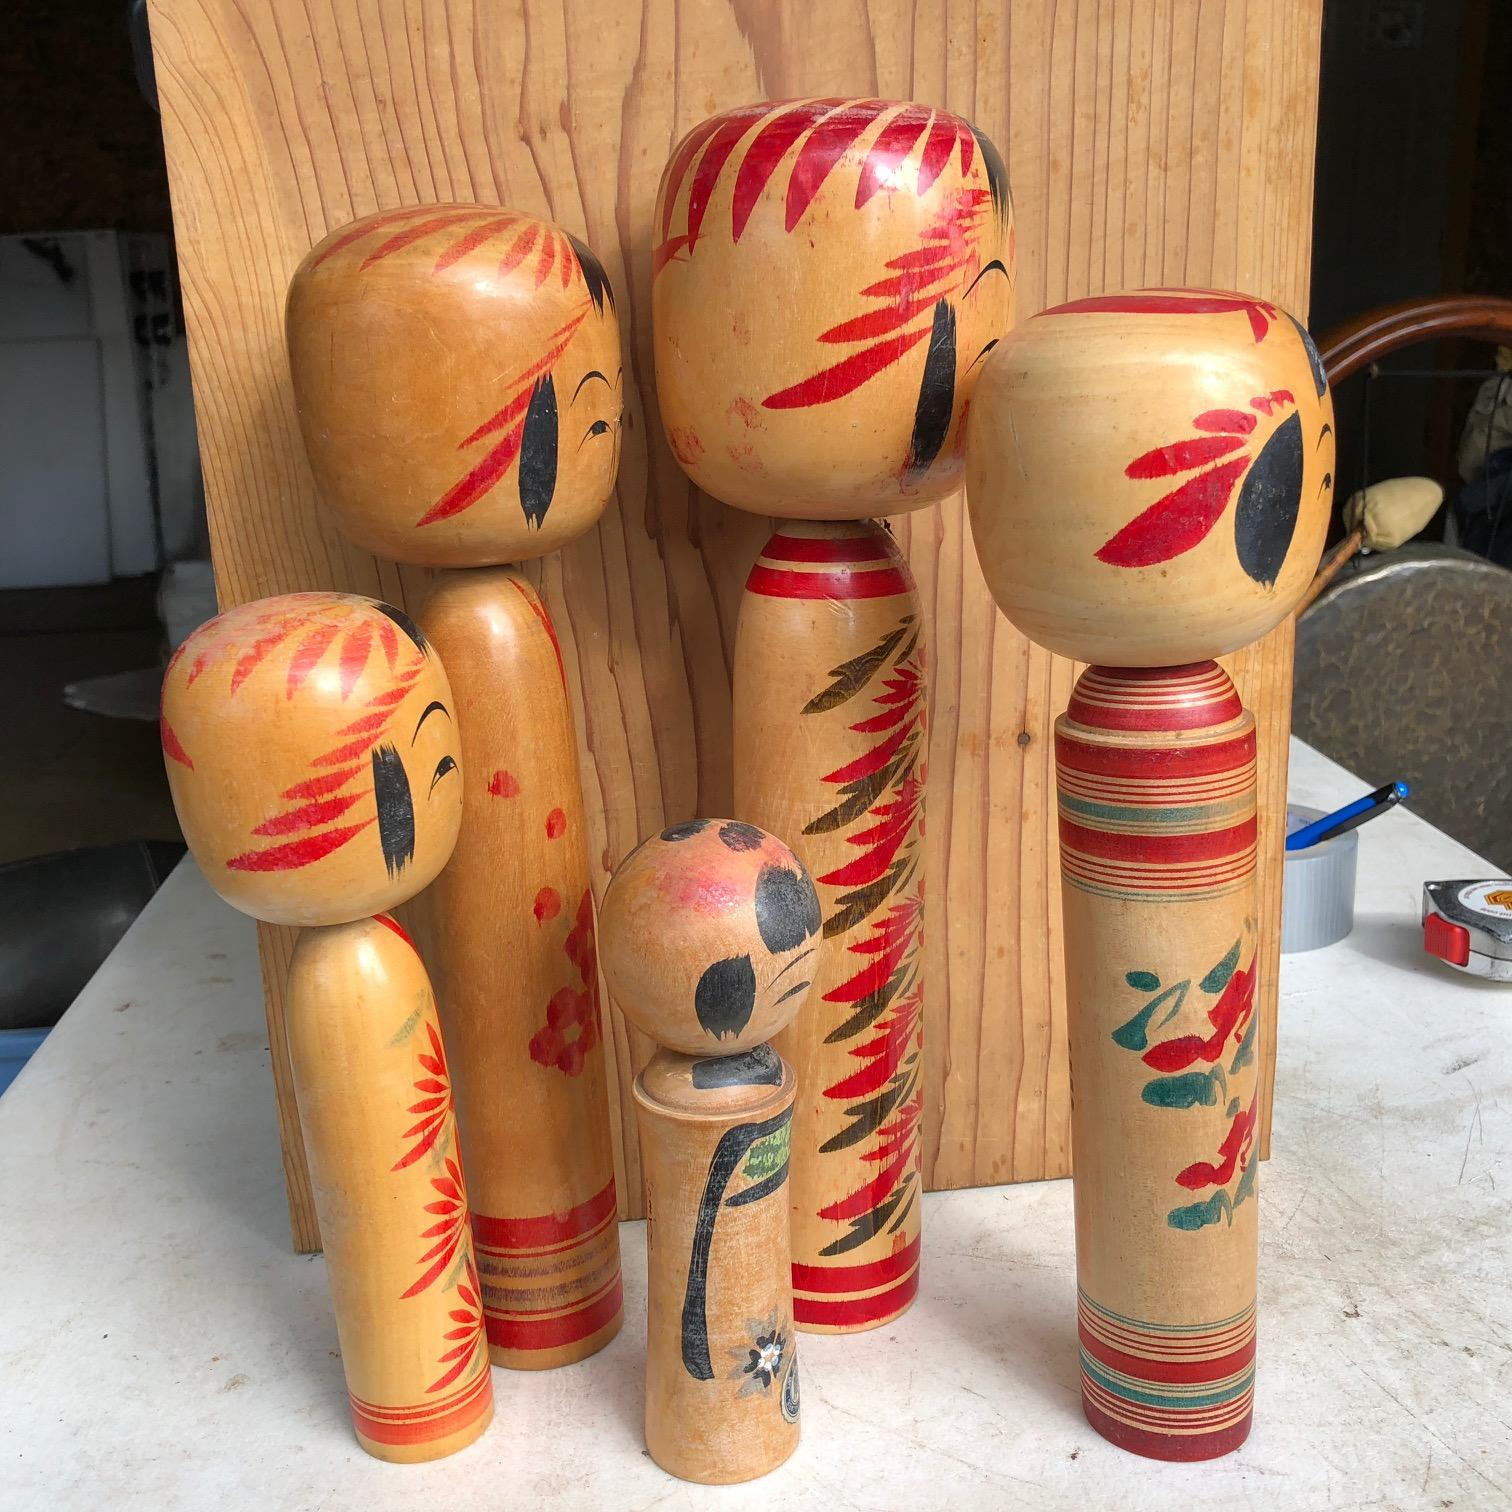 Five hand painted and signed Kokeshi Dolls from Old Japan.

A beautifully preserved five some (5) of Japanese Folk Art hand carved and hand painted Kokeshi dolls one of Japan's most popular antique doll collectibles and unique handicraft forms.